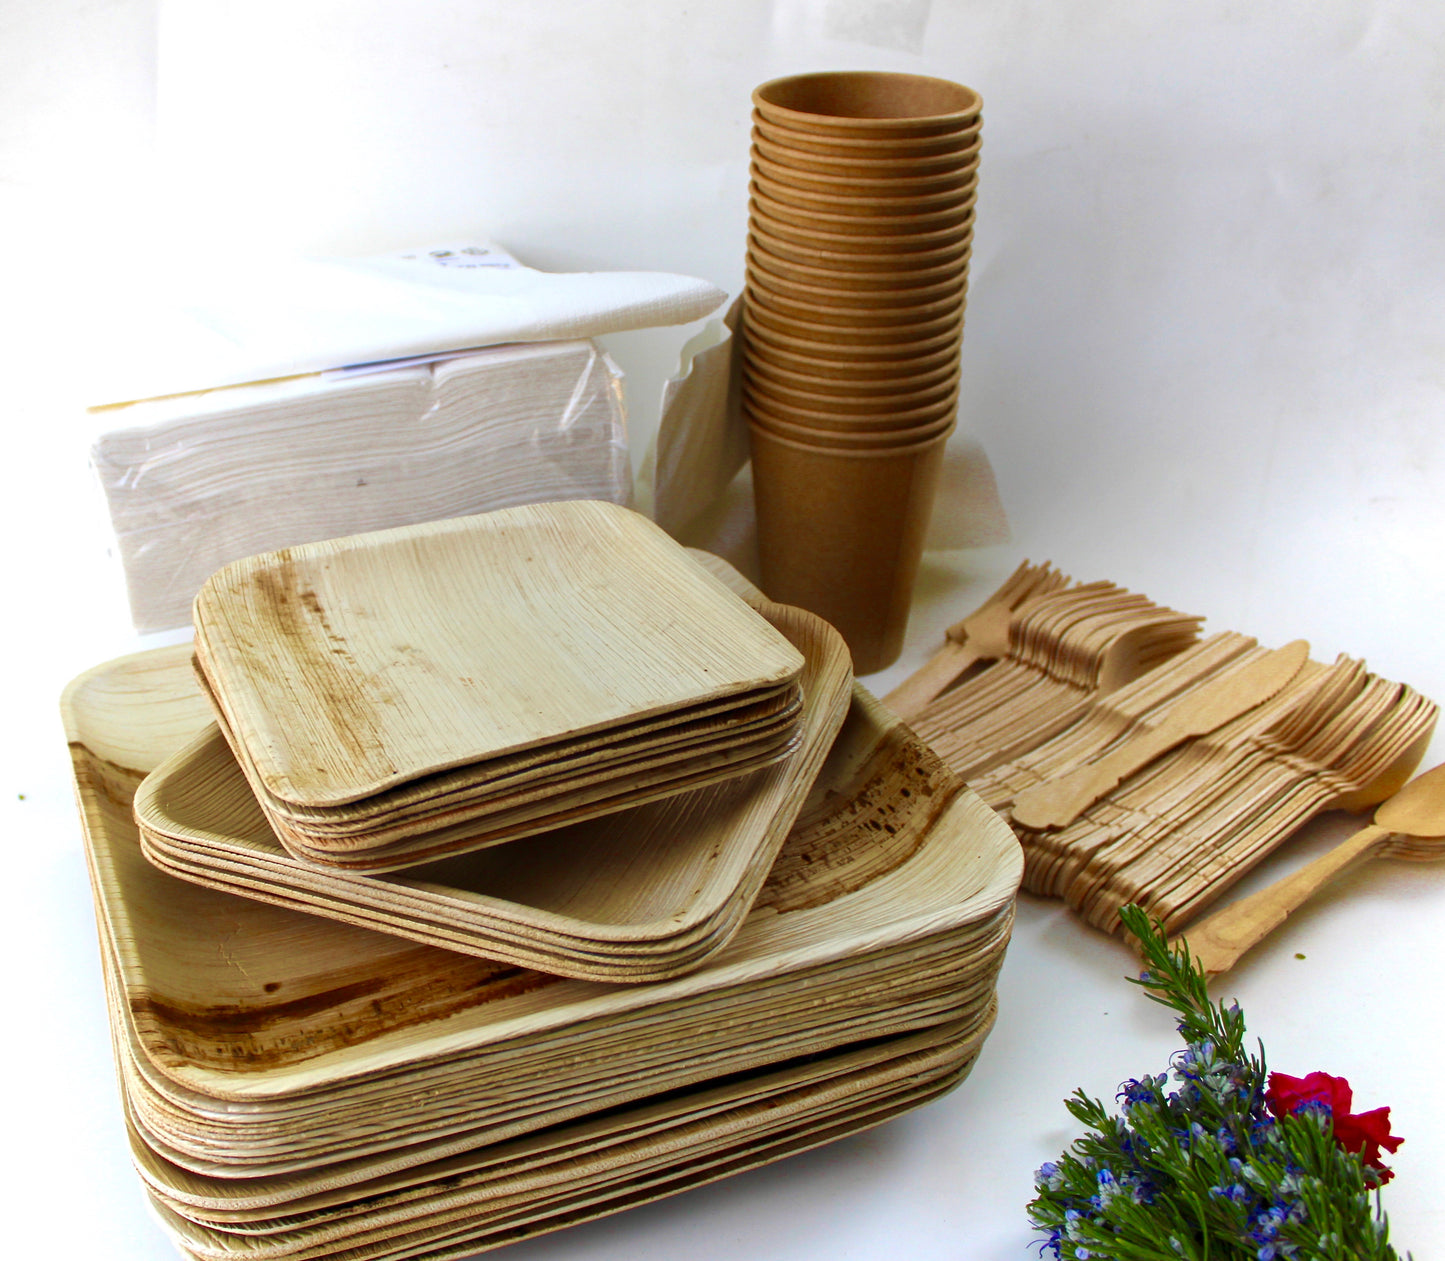 Copy of Bamboo Type Palm Leaf 25 Pic 10"Square  - 25 pice Heart  6"- 25  pic  cup  - 75 pic Cutlery - 50 Pic Napkin